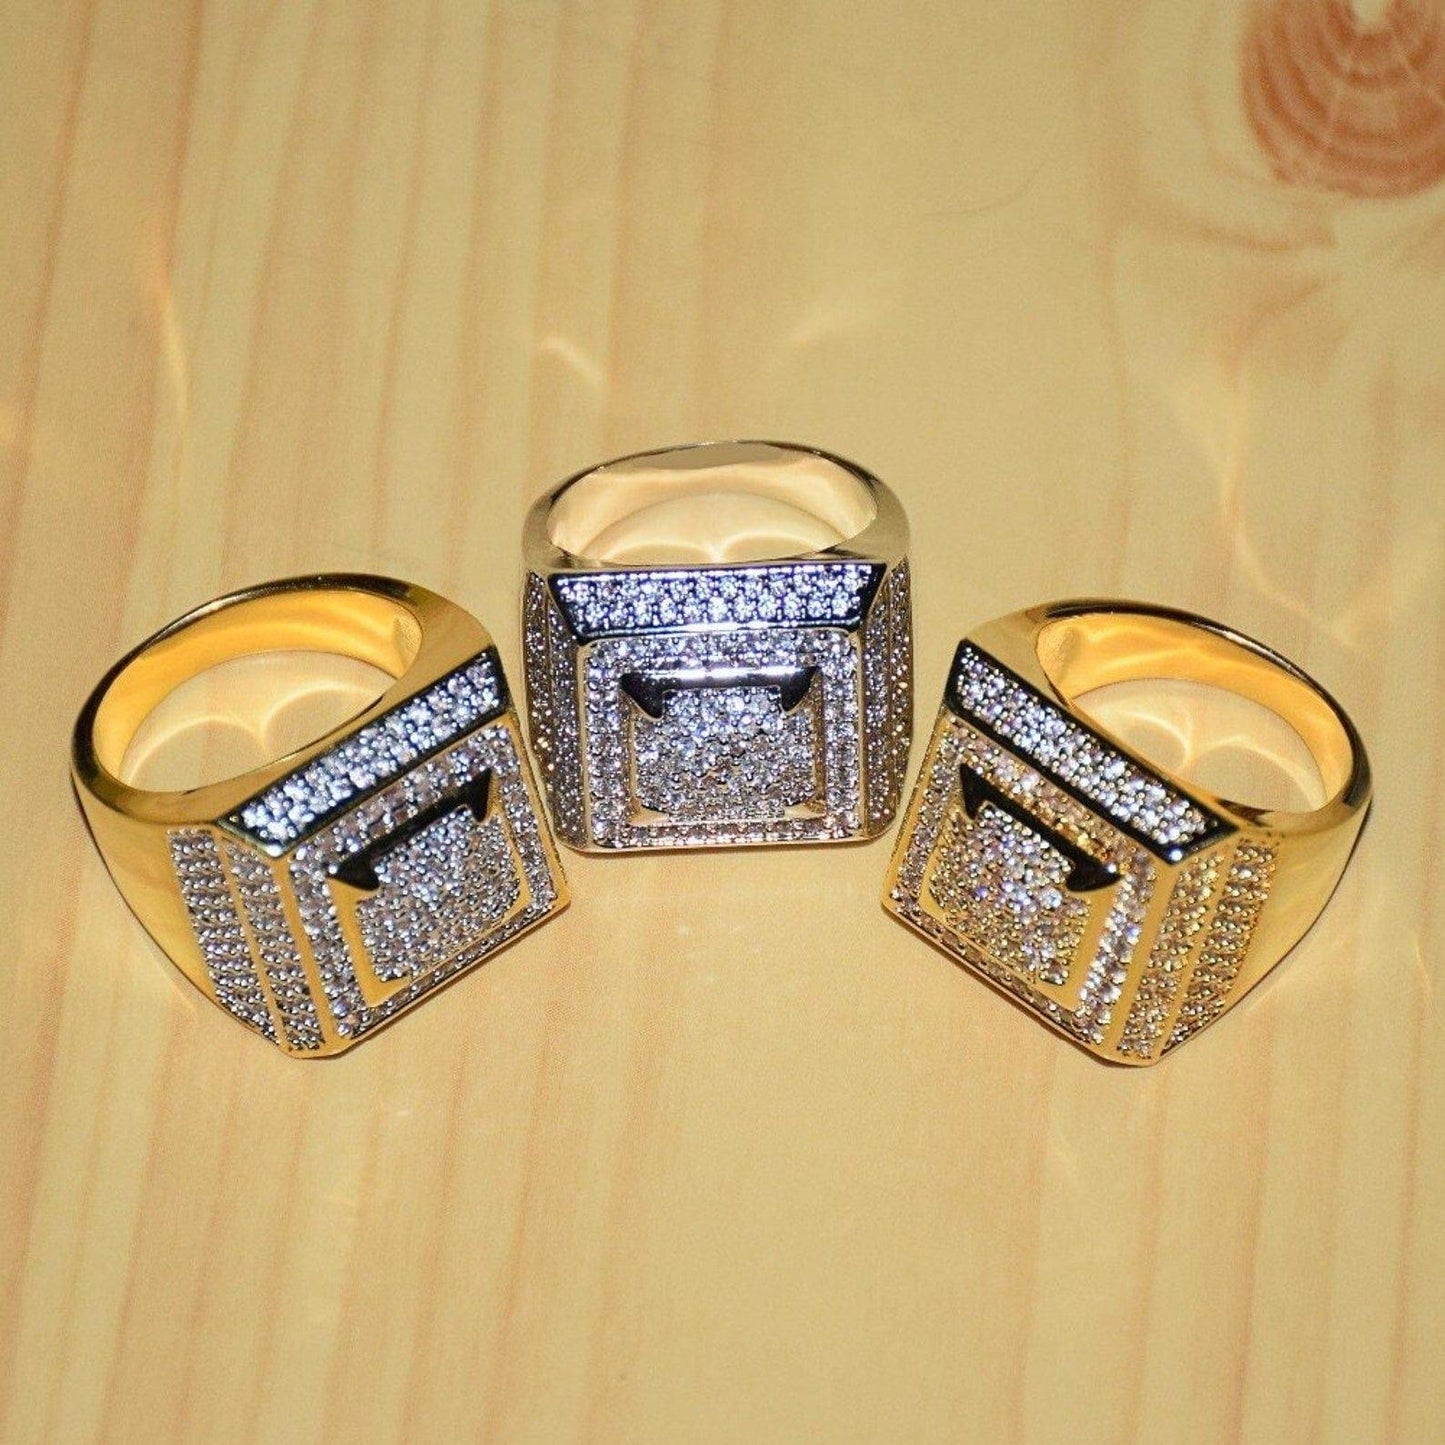 Men's Full Moissanite Diamond Front Pyramid Style Iced Out Hip Hop Ring - JBR Jeweler